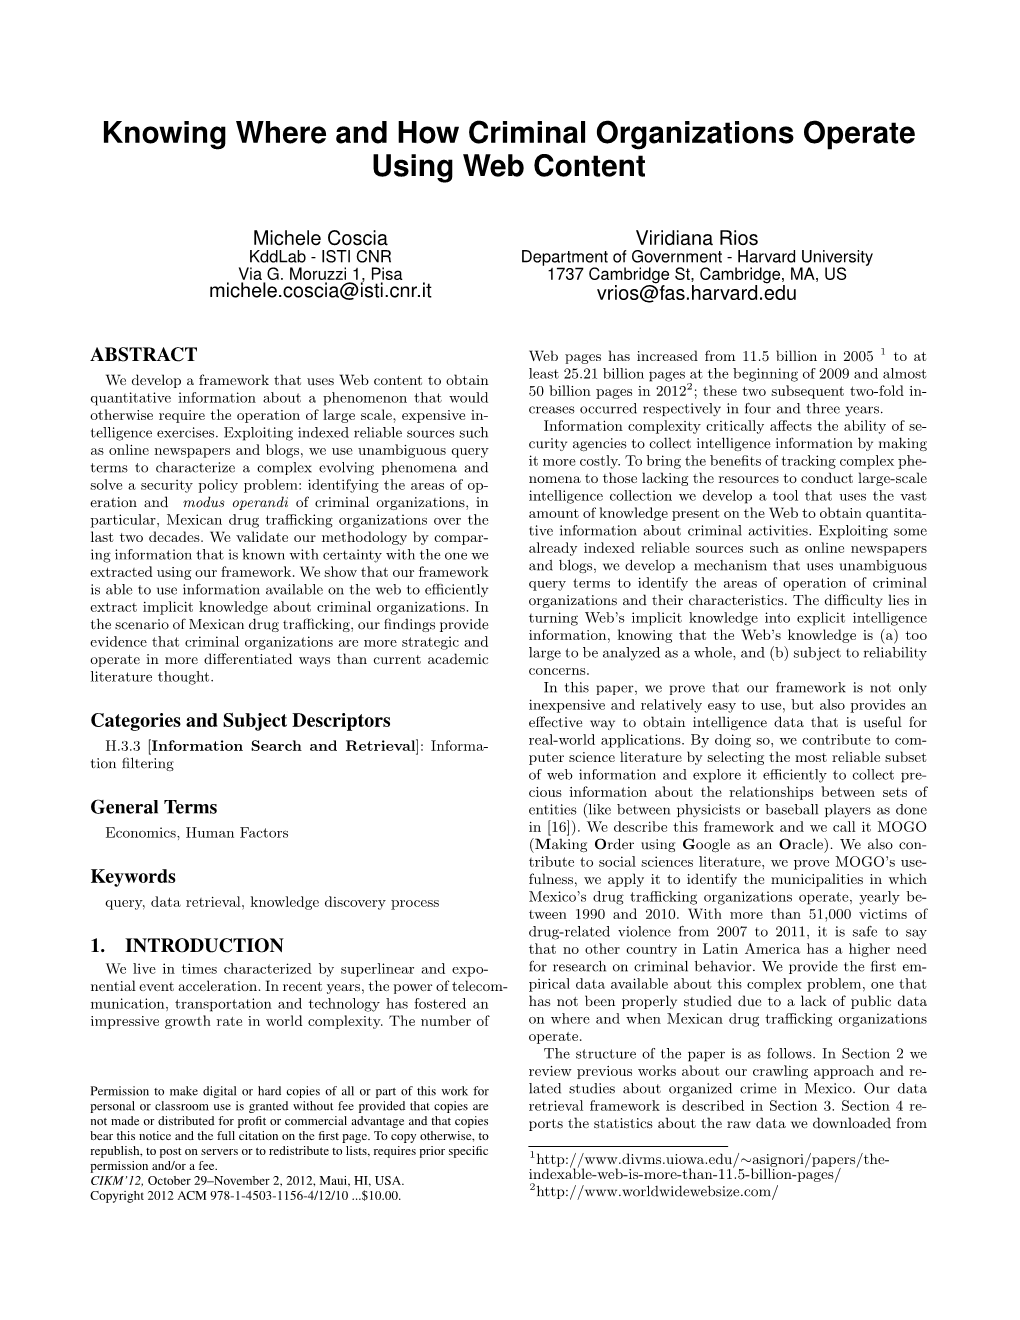 Knowing Where and How Criminal Organizations Operate Using Web Content